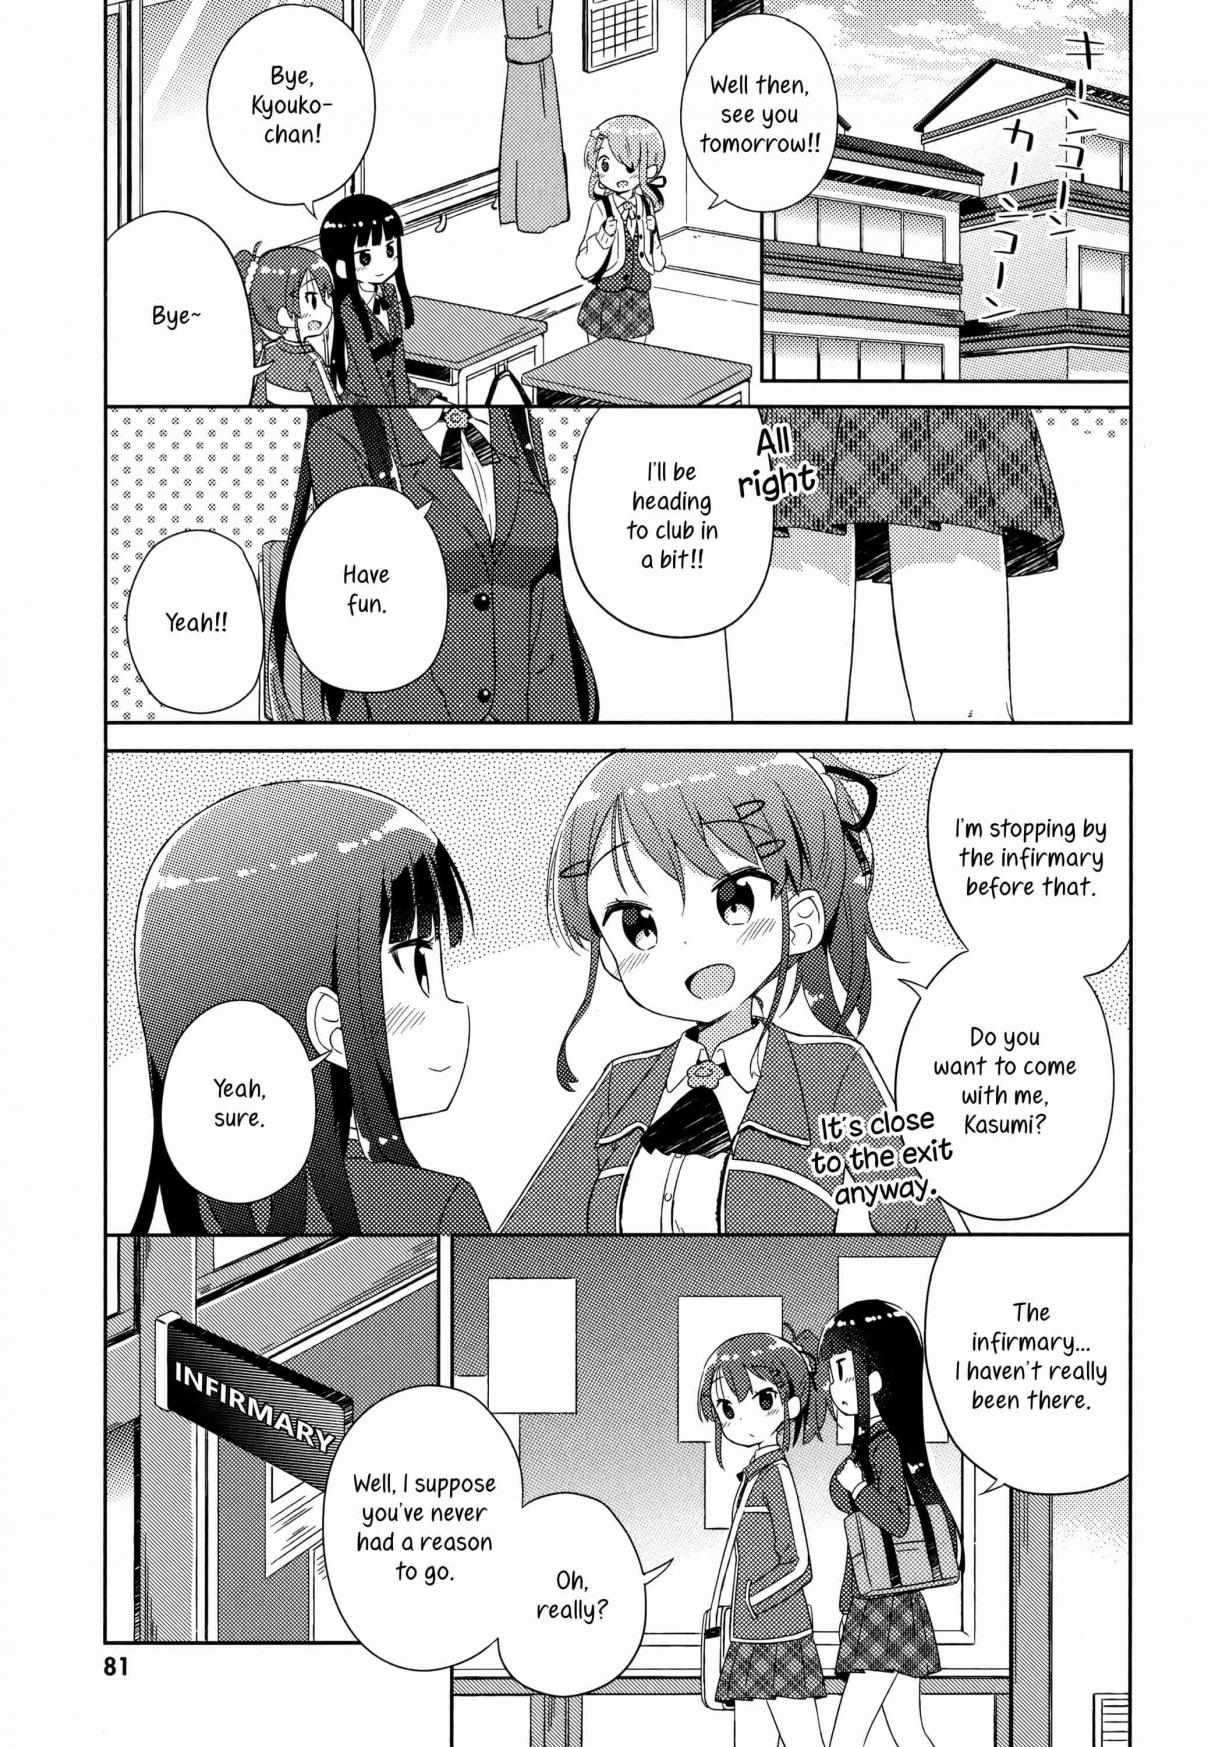 She Gets Girls Every day. Vol. 1 Ch. 5 In the empty infirmary.